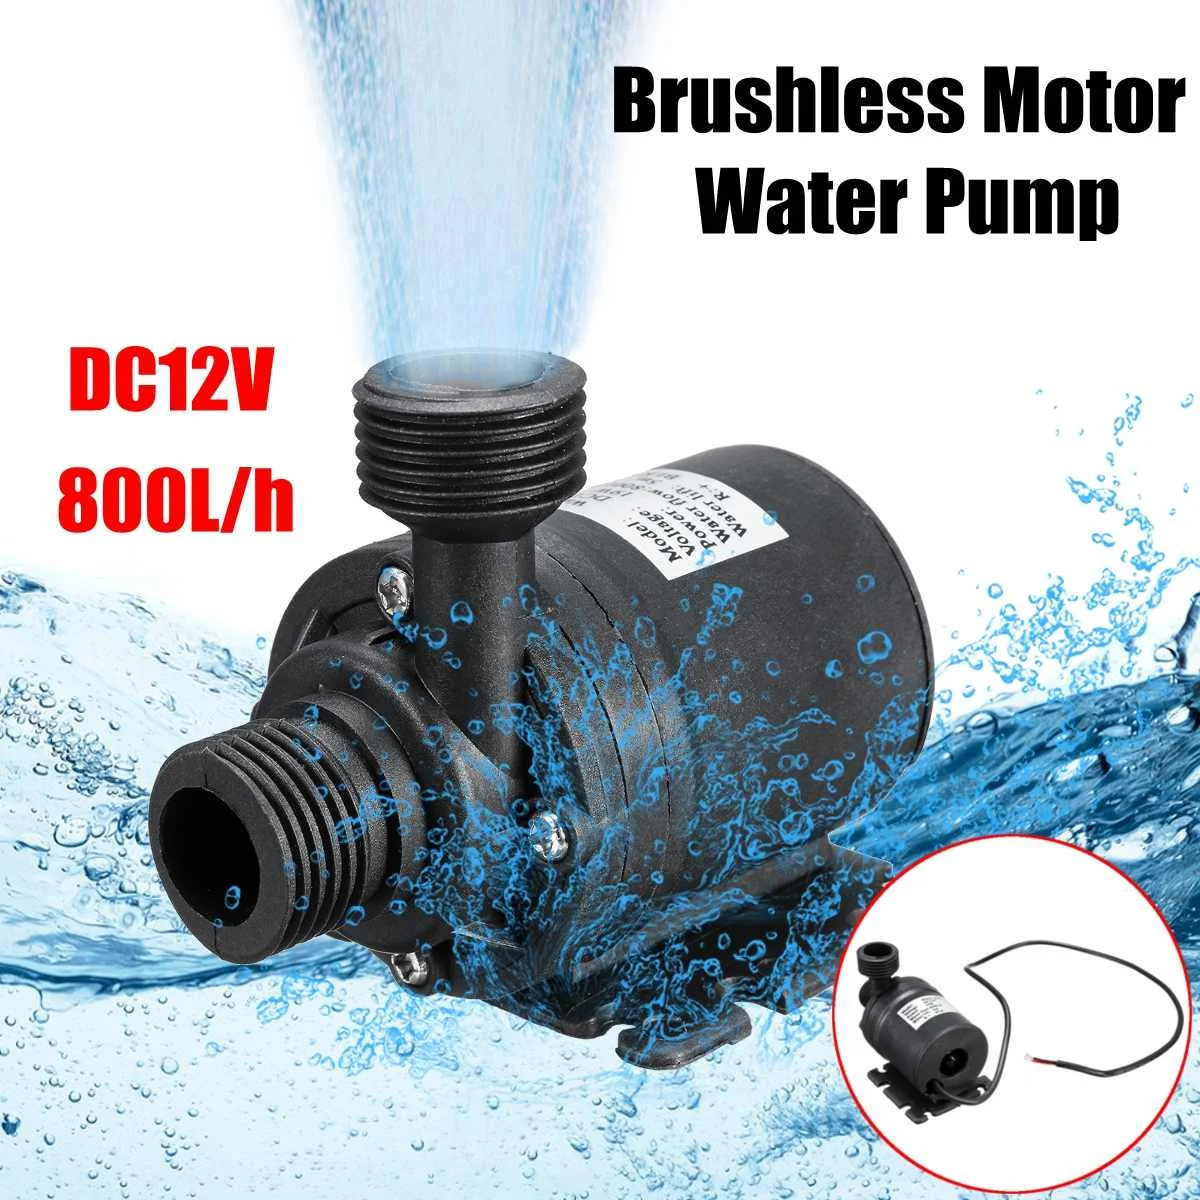 800L/H 12V DC 5M Mini Brushless Motor Ultra-quiet Portable Submersible Water Pump for Cooling System Fountains Heater Pumps